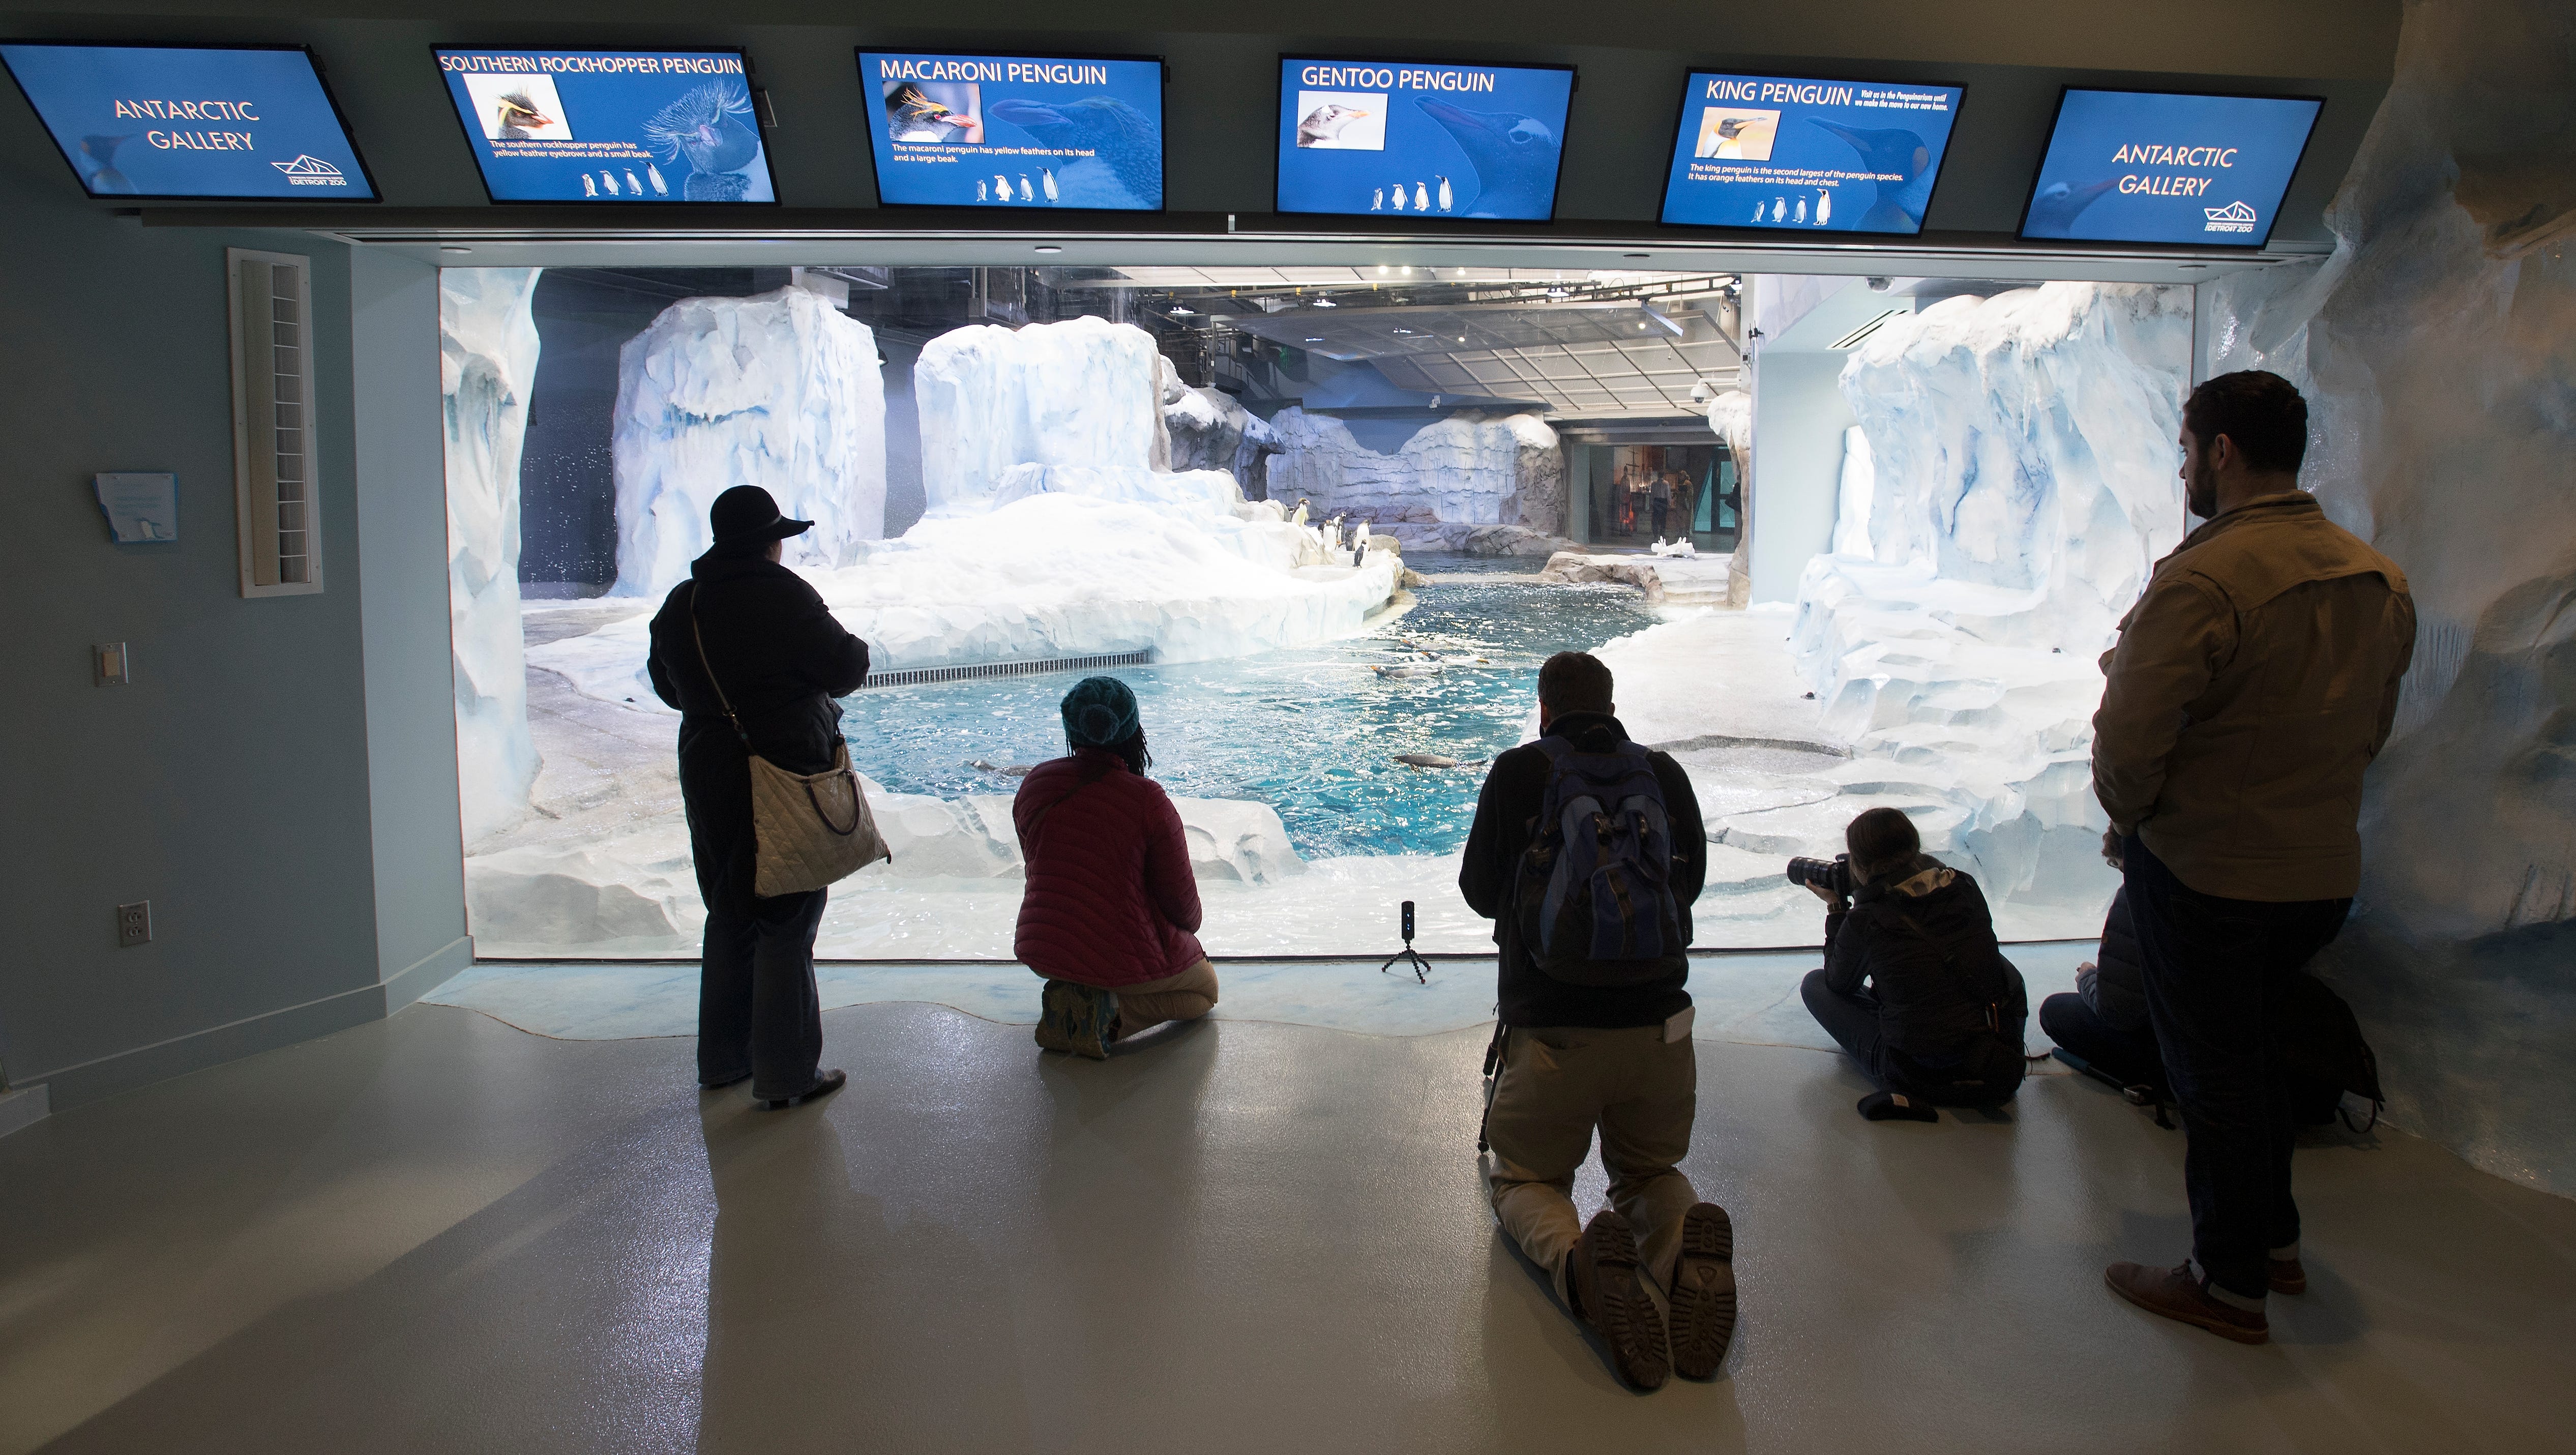 The new habitat features air temperatures at a near-freezing 37 degrees Fahrenheit but considerably warmer for the viewing public.